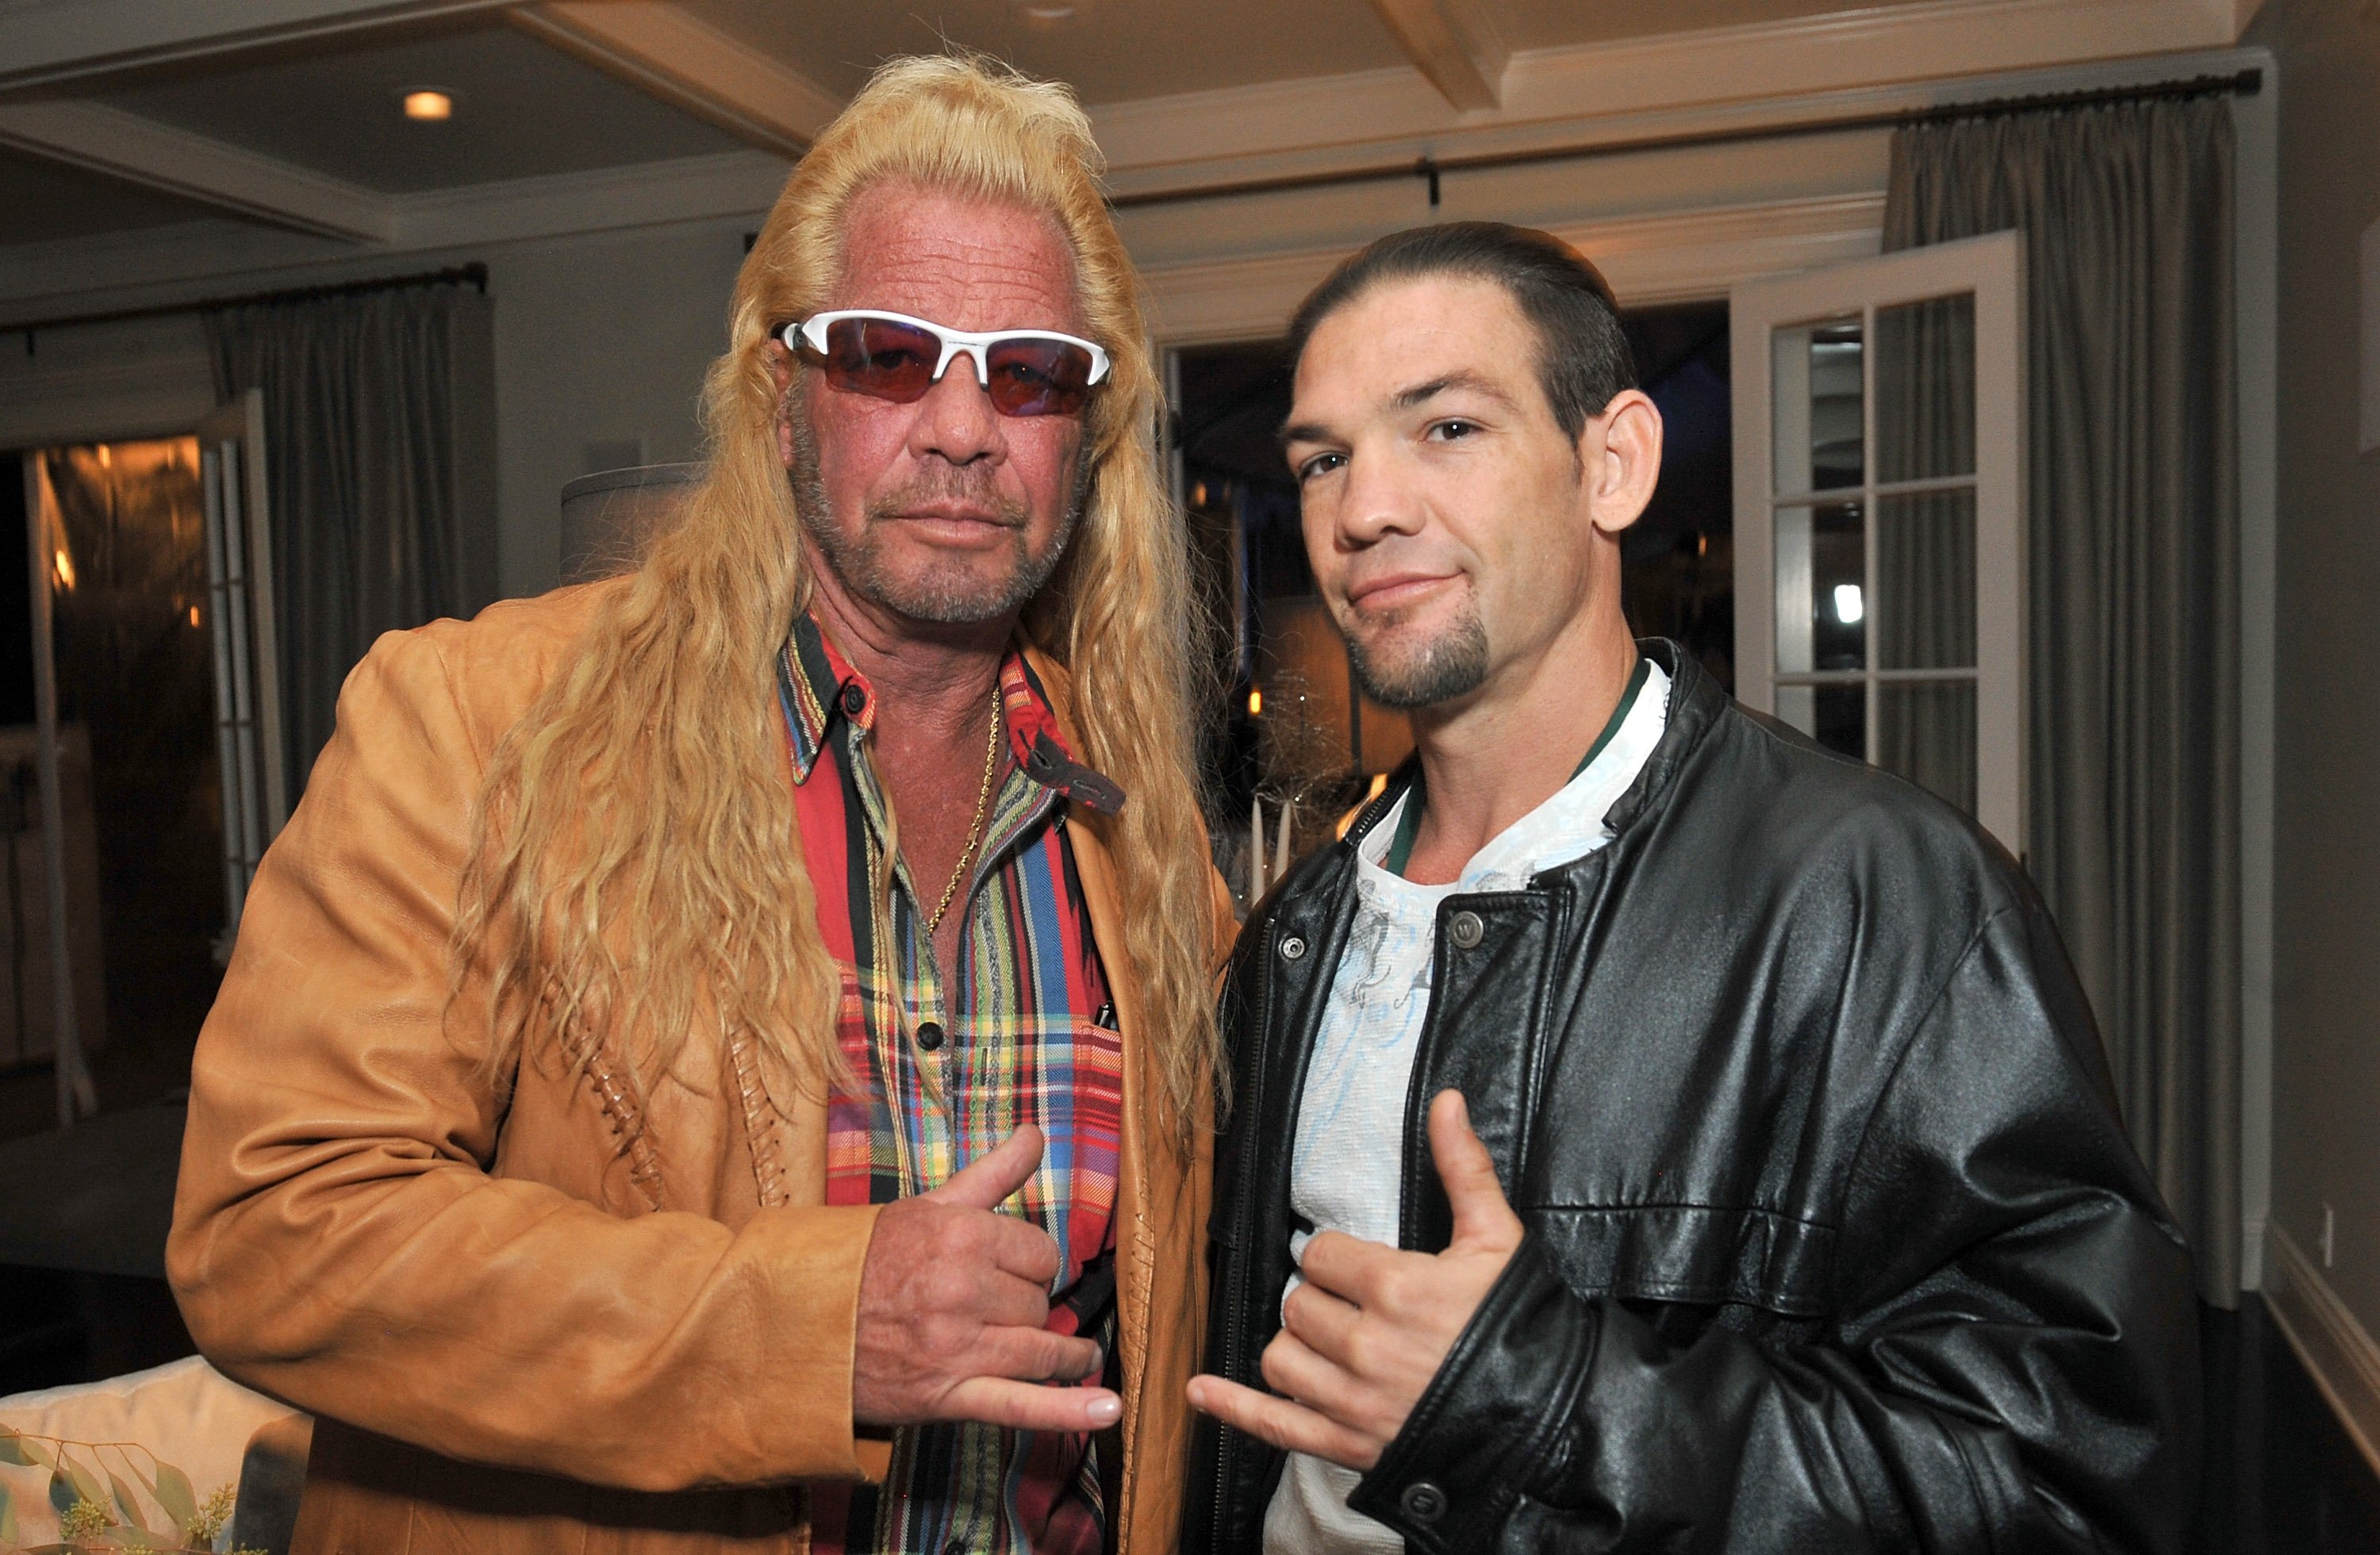 Dog Chapman and Leland Chapman attend the 2013 Electus & College Humor Holiday Party on December 12, 2013, in Los Angeles, California. | Source: Getty Images.